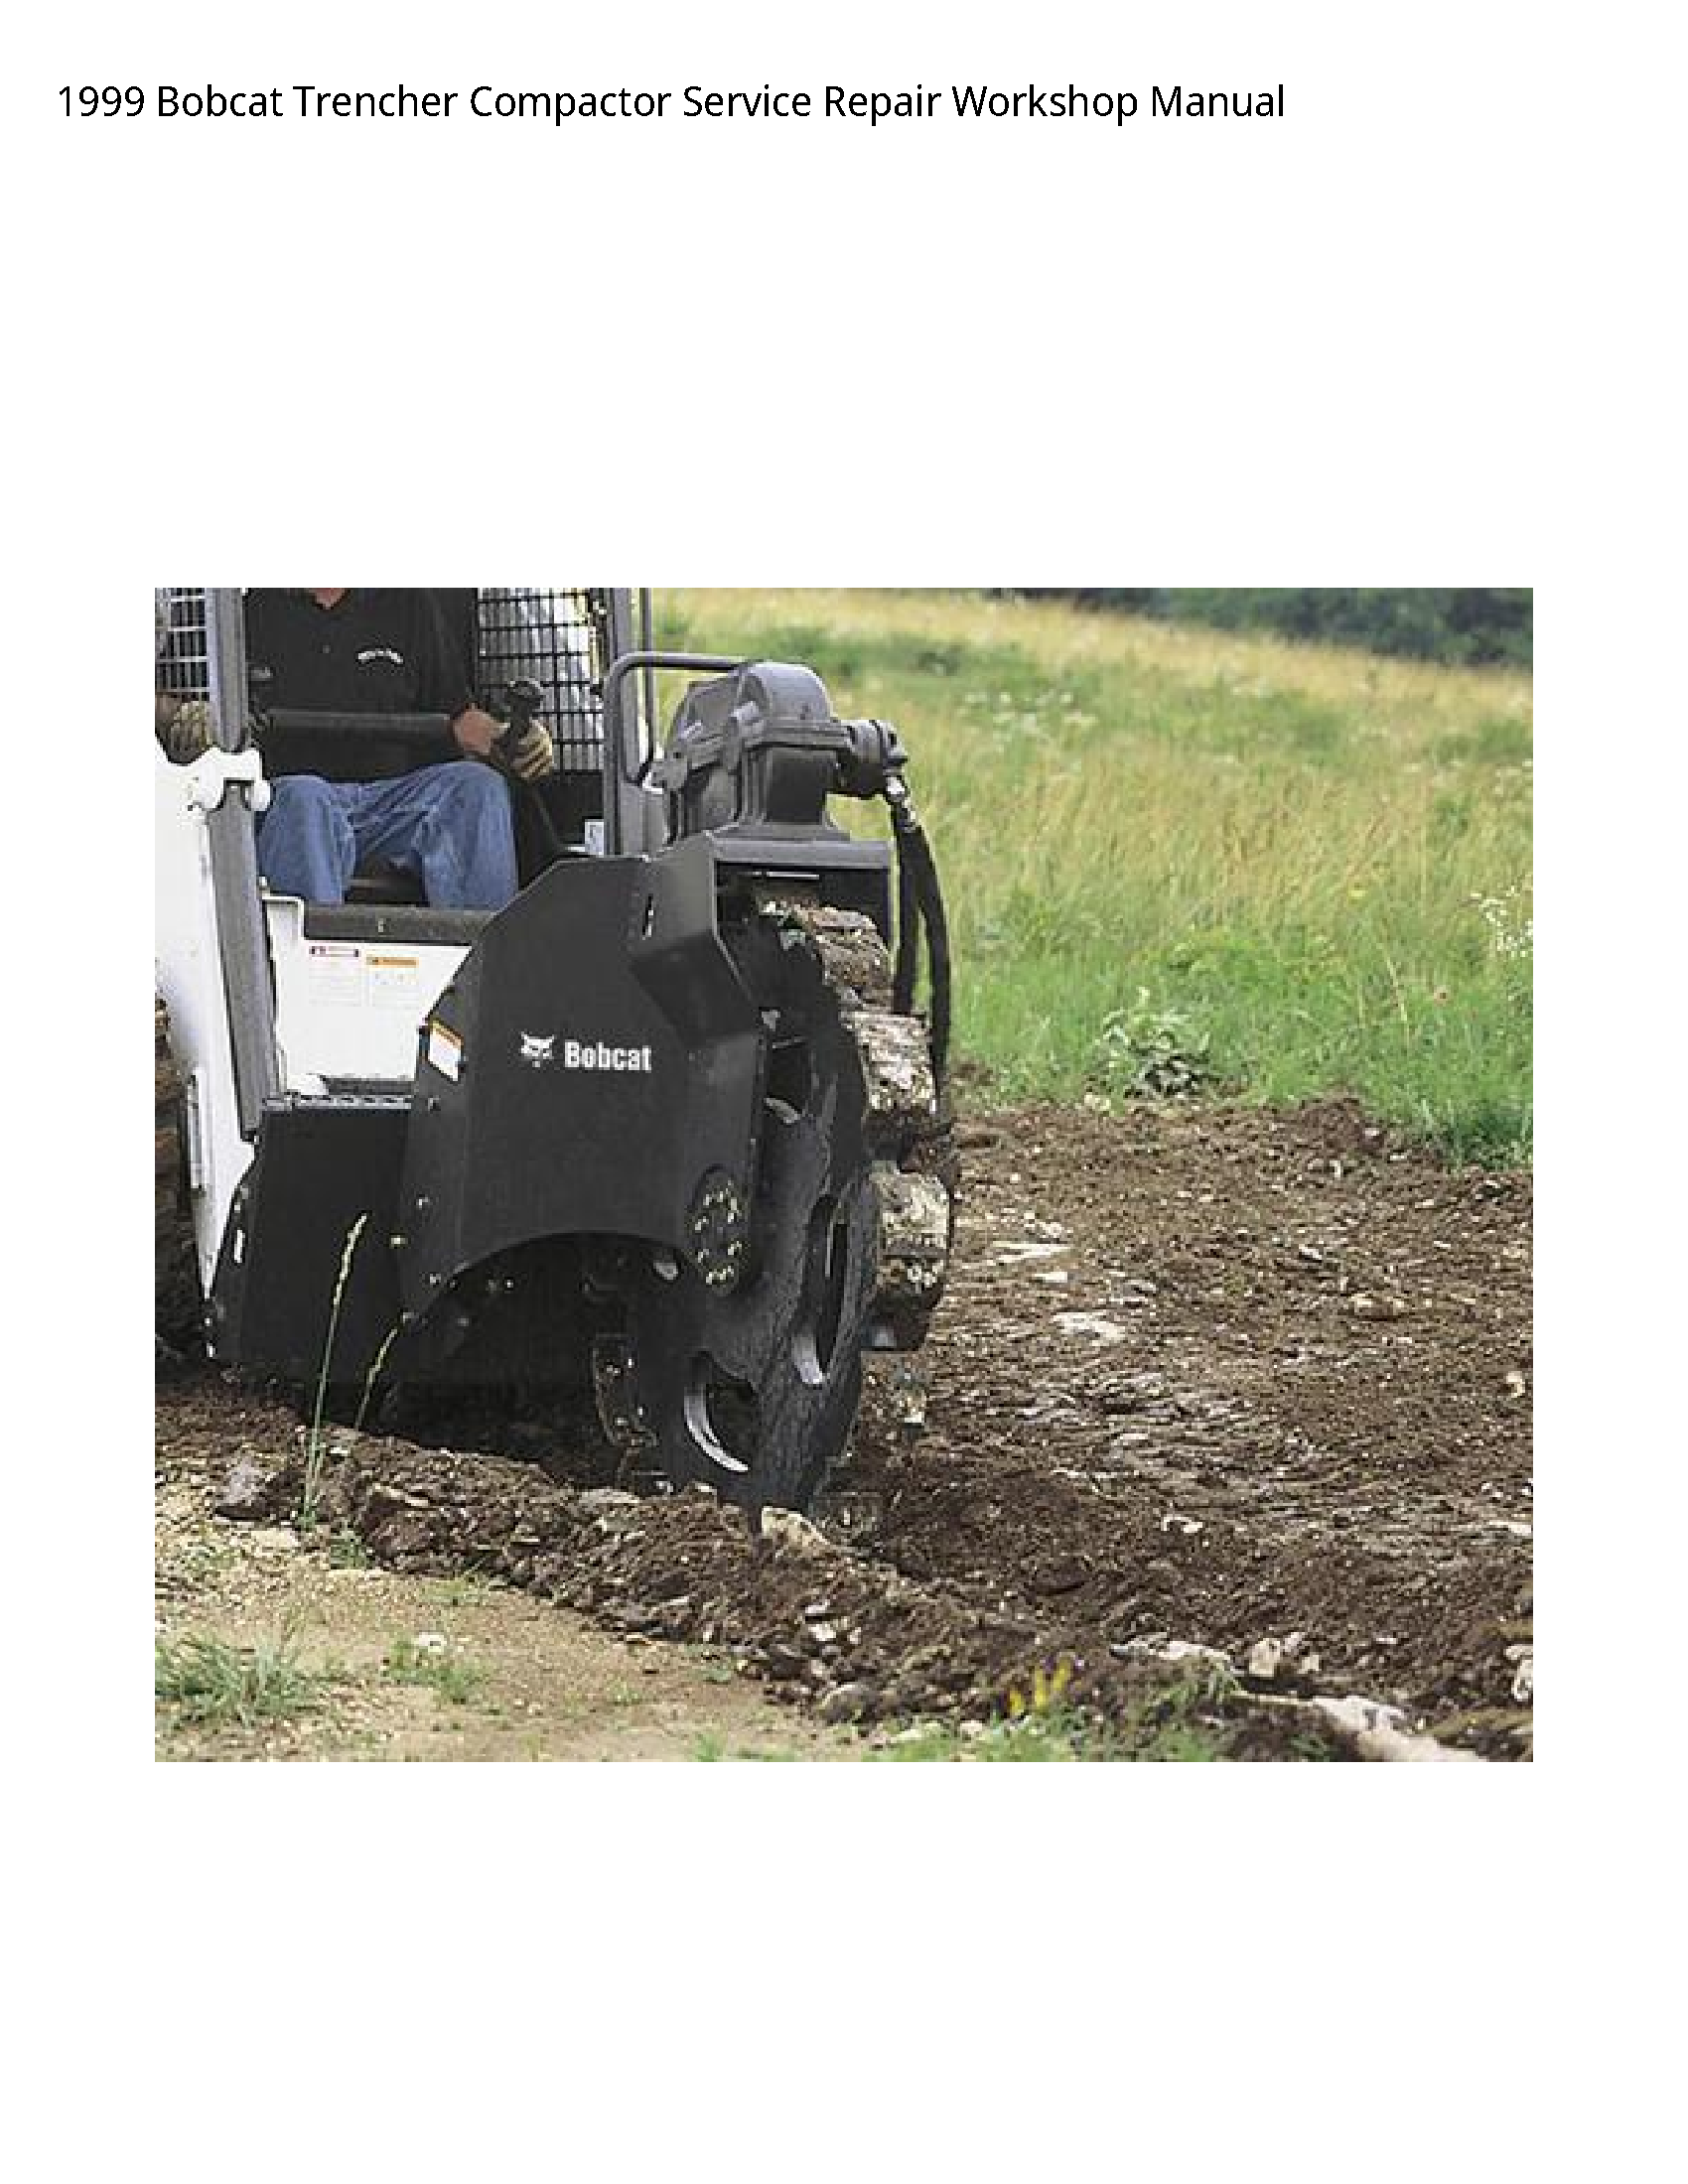 Bobcat Trencher Compactor manual